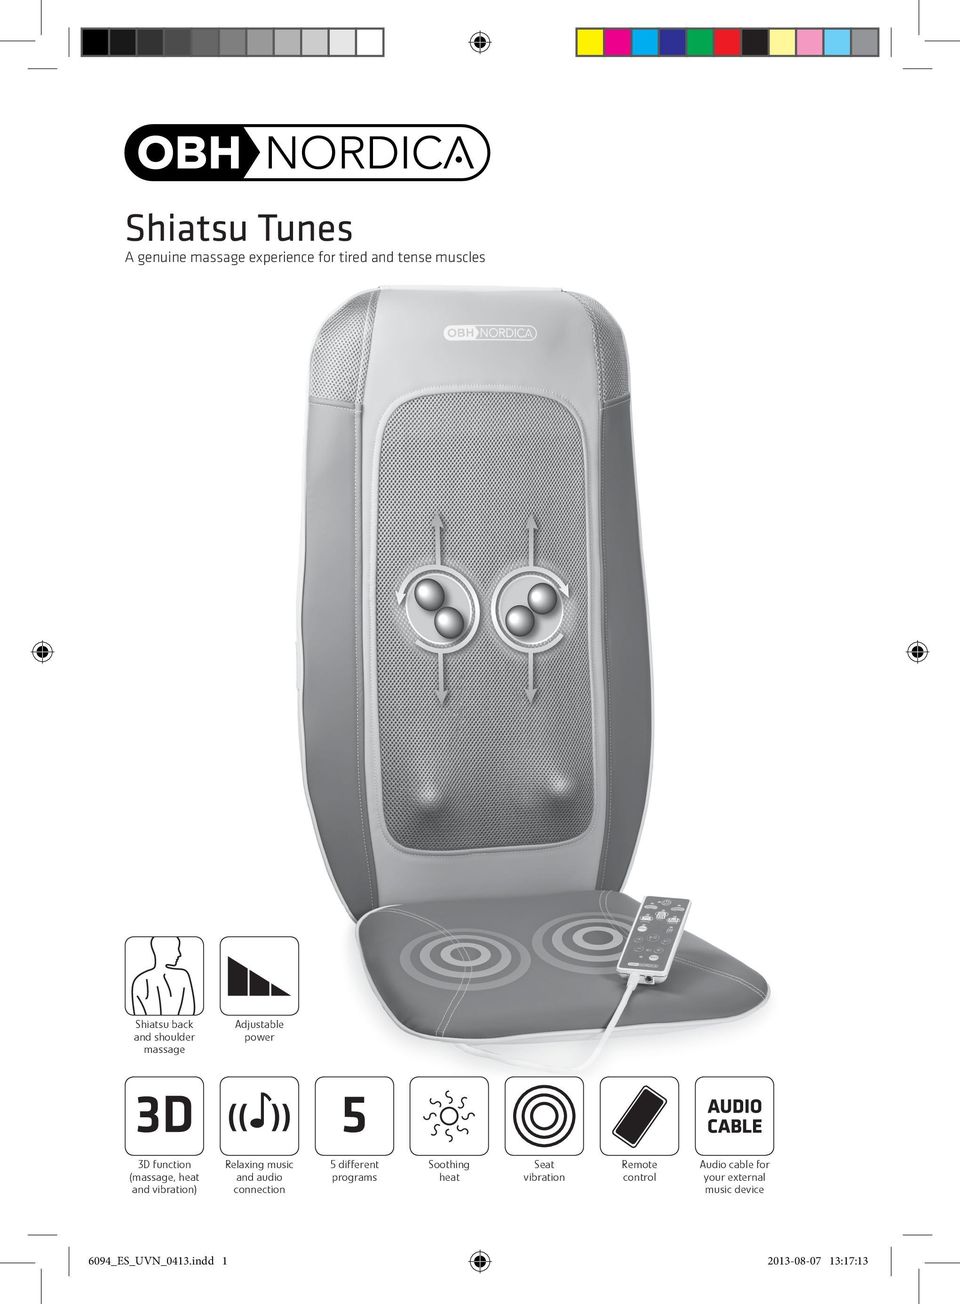 music and audio connection 5 different programs Soothing heat Seat vibration Remote